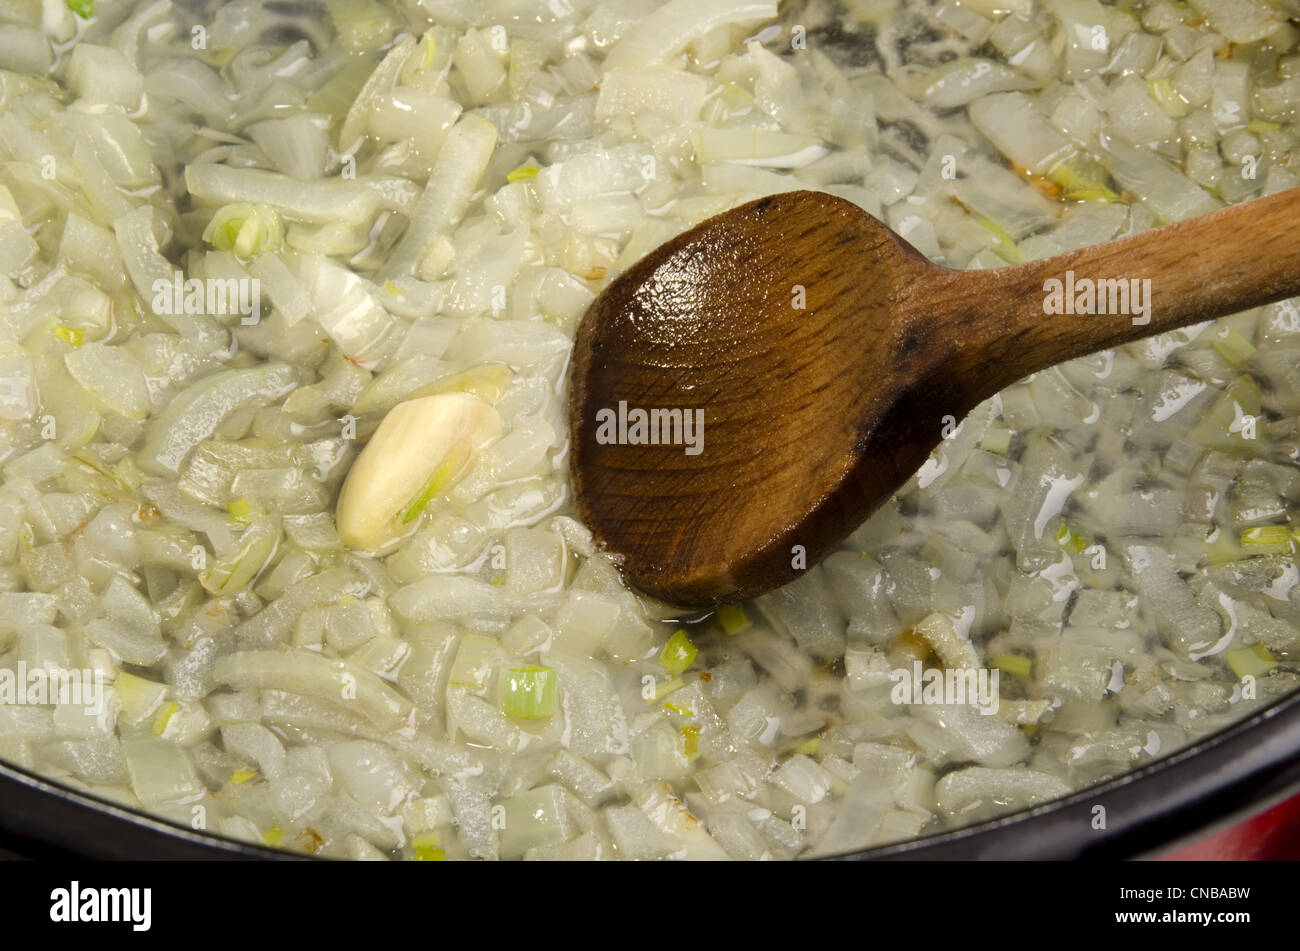 Garlic and onions are fried in a pot Stock Photo